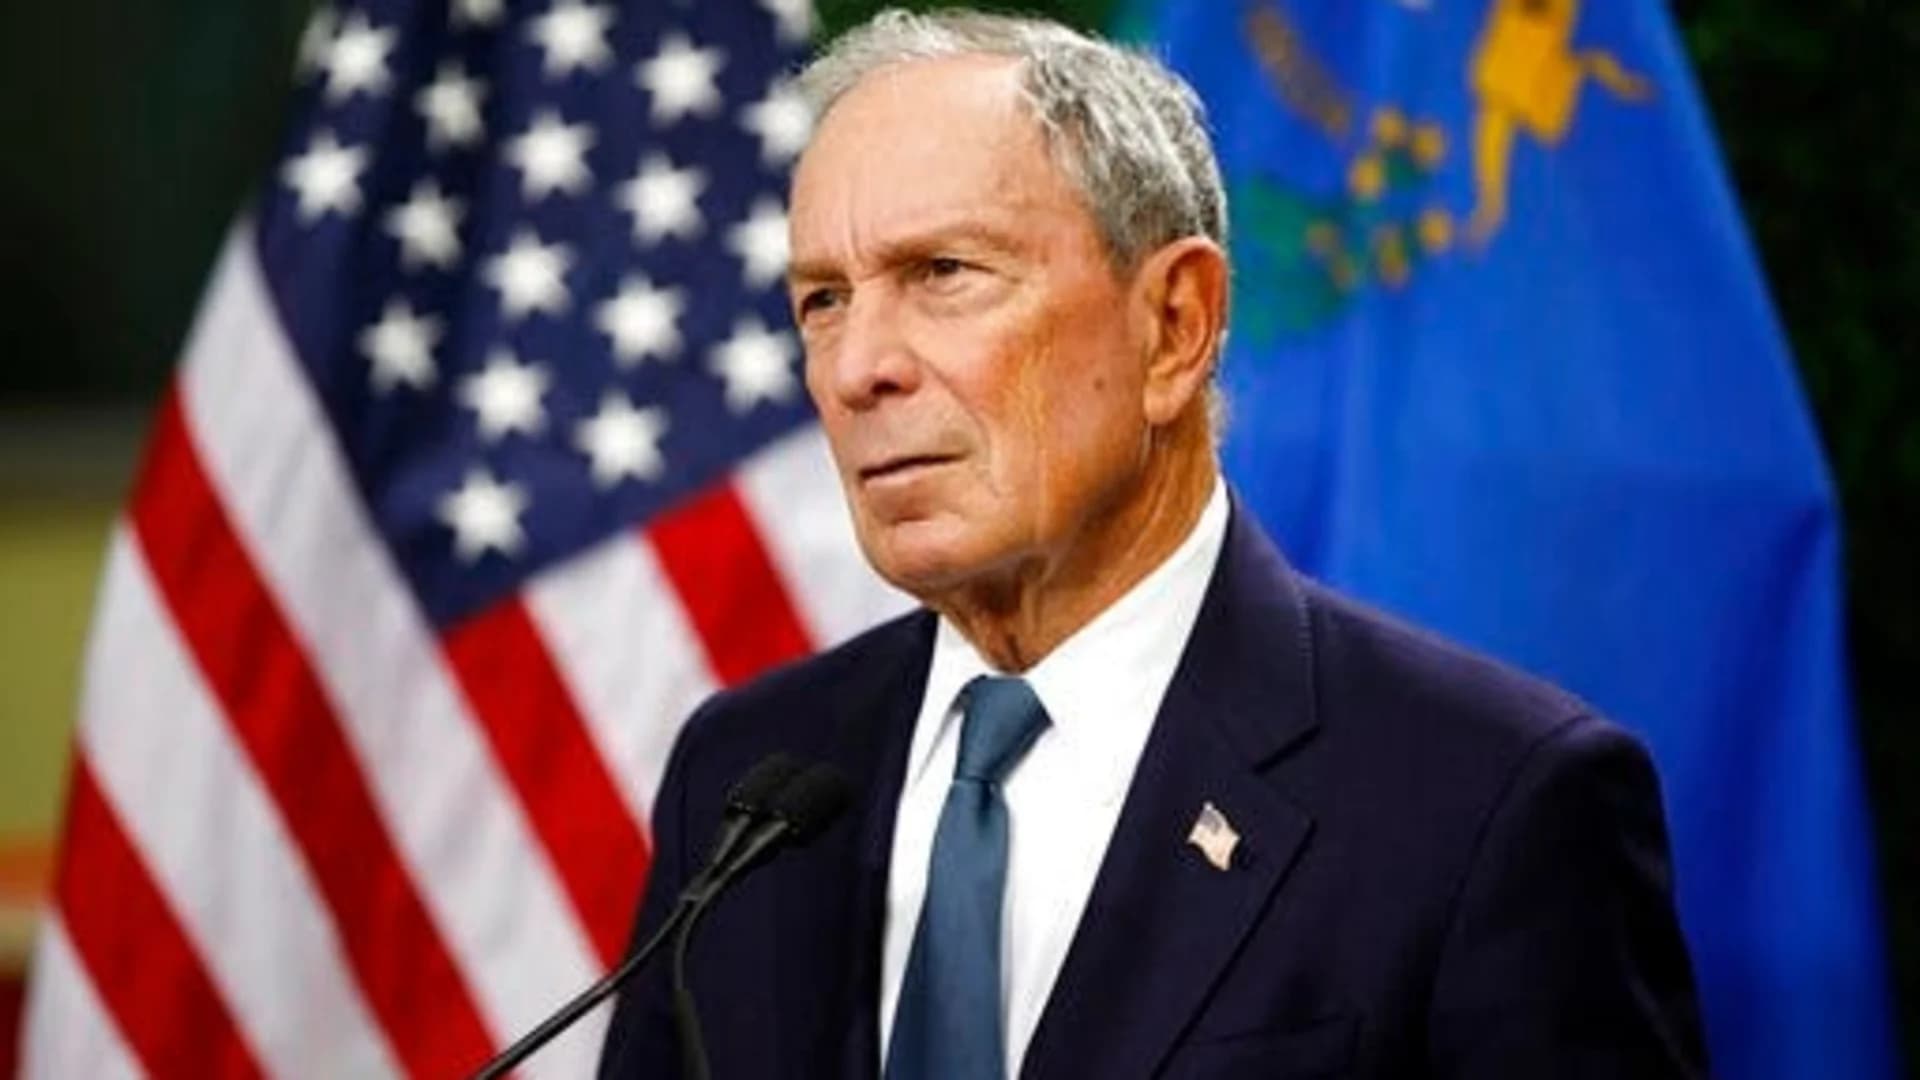 Michael Bloomberg opens door to 2020 presidential campaign